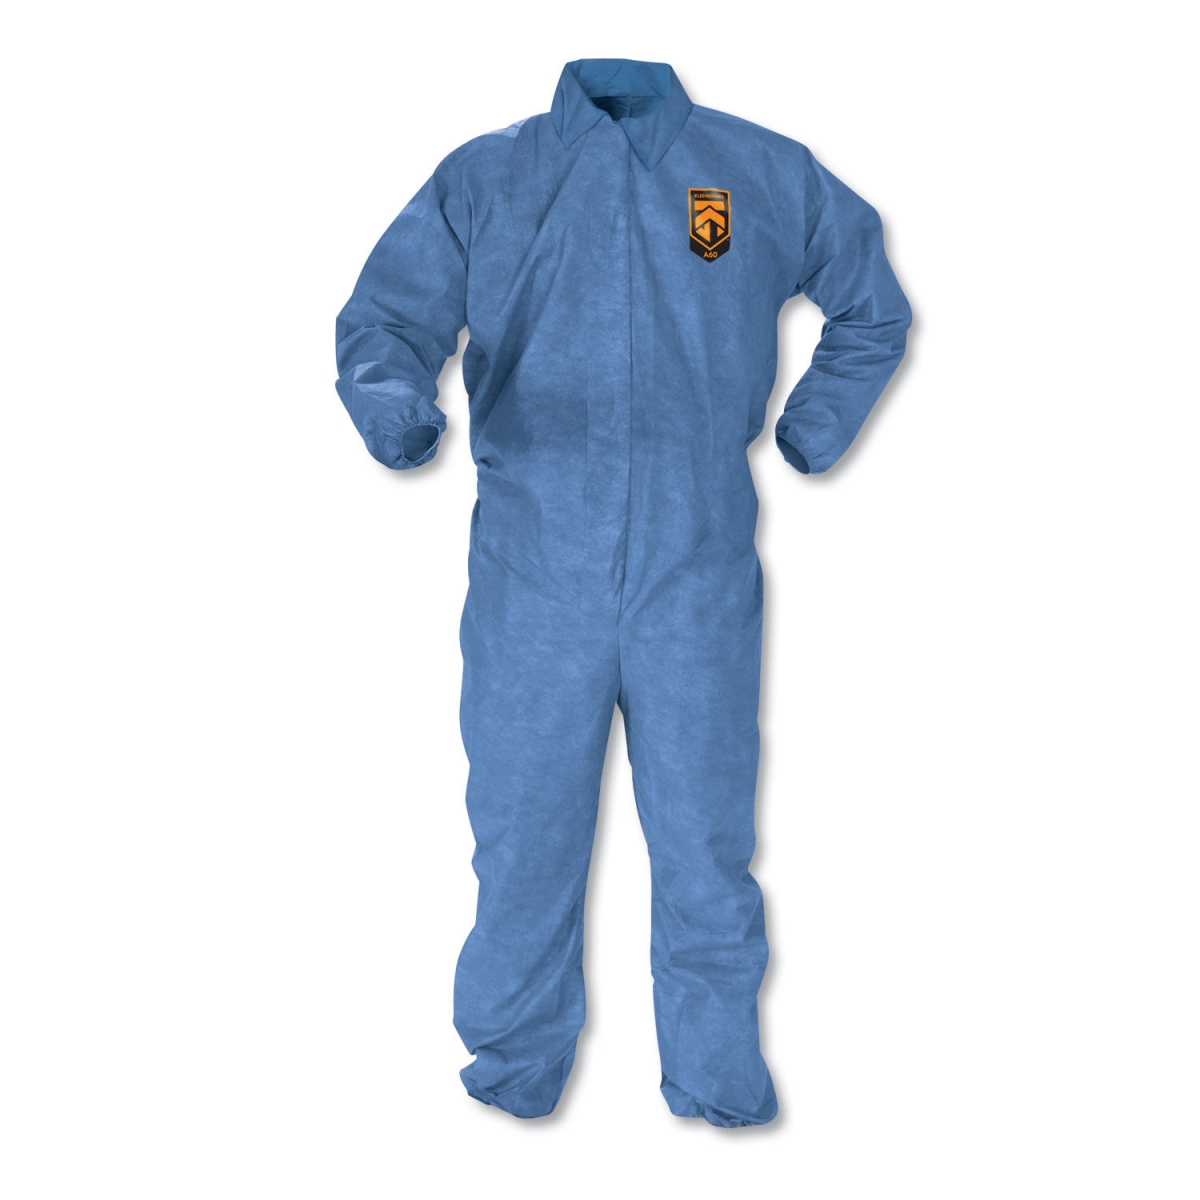 KCC45003 Elastic-Cuff, Ankle & Back Coveralls, Blue - Large -  Kimberly-Clark, KCC 45003